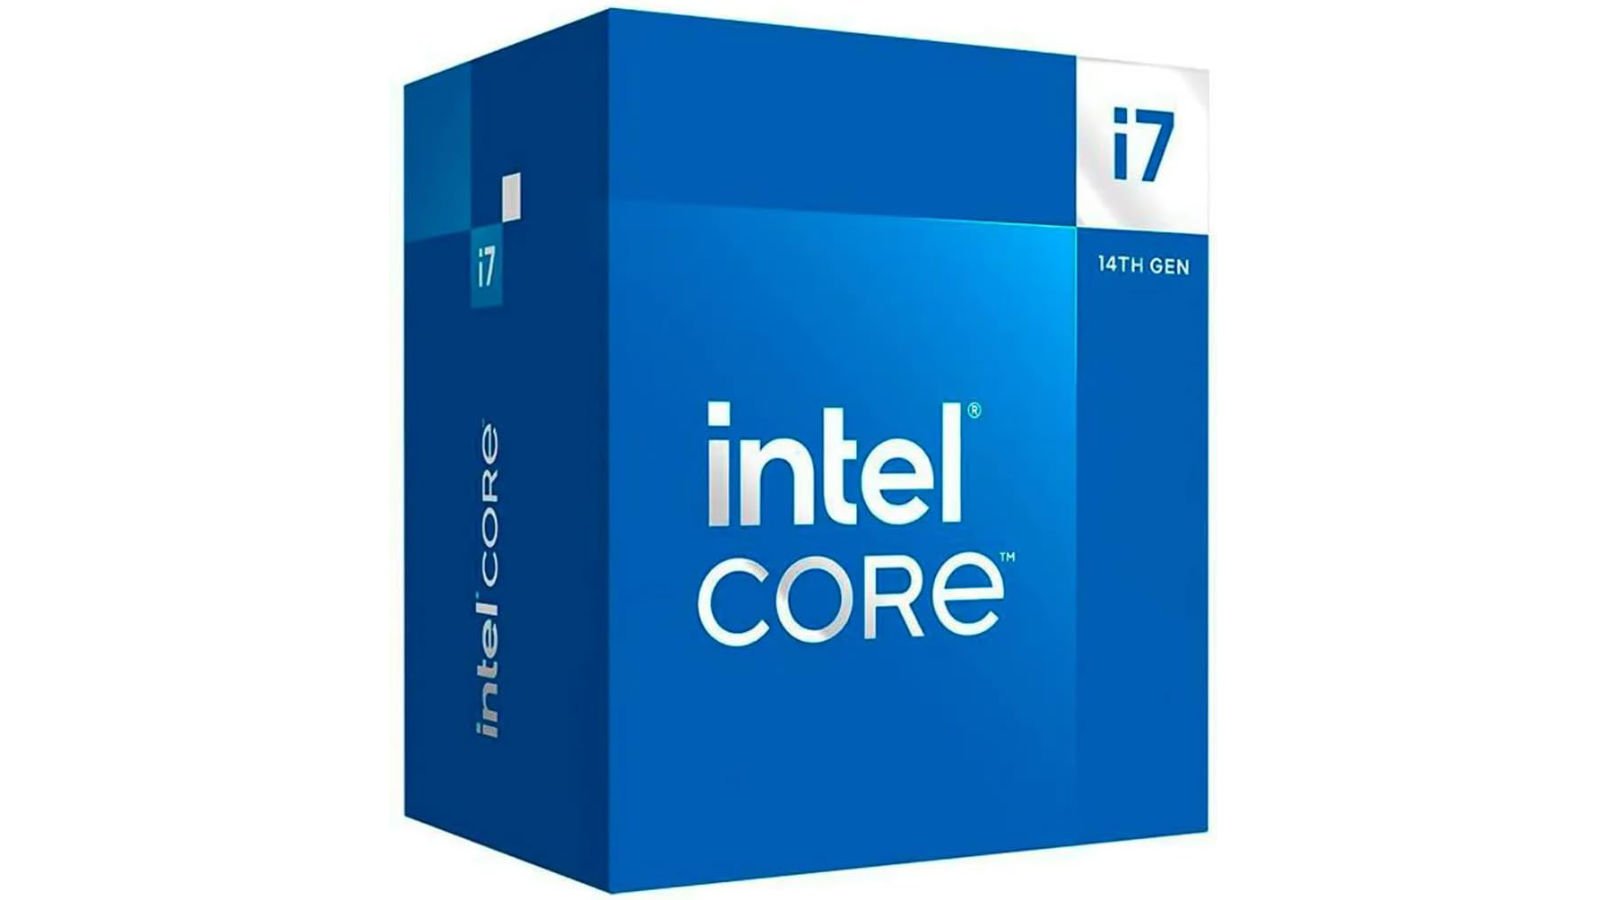 Intel Core i7 14th Gen retail box against a white background.